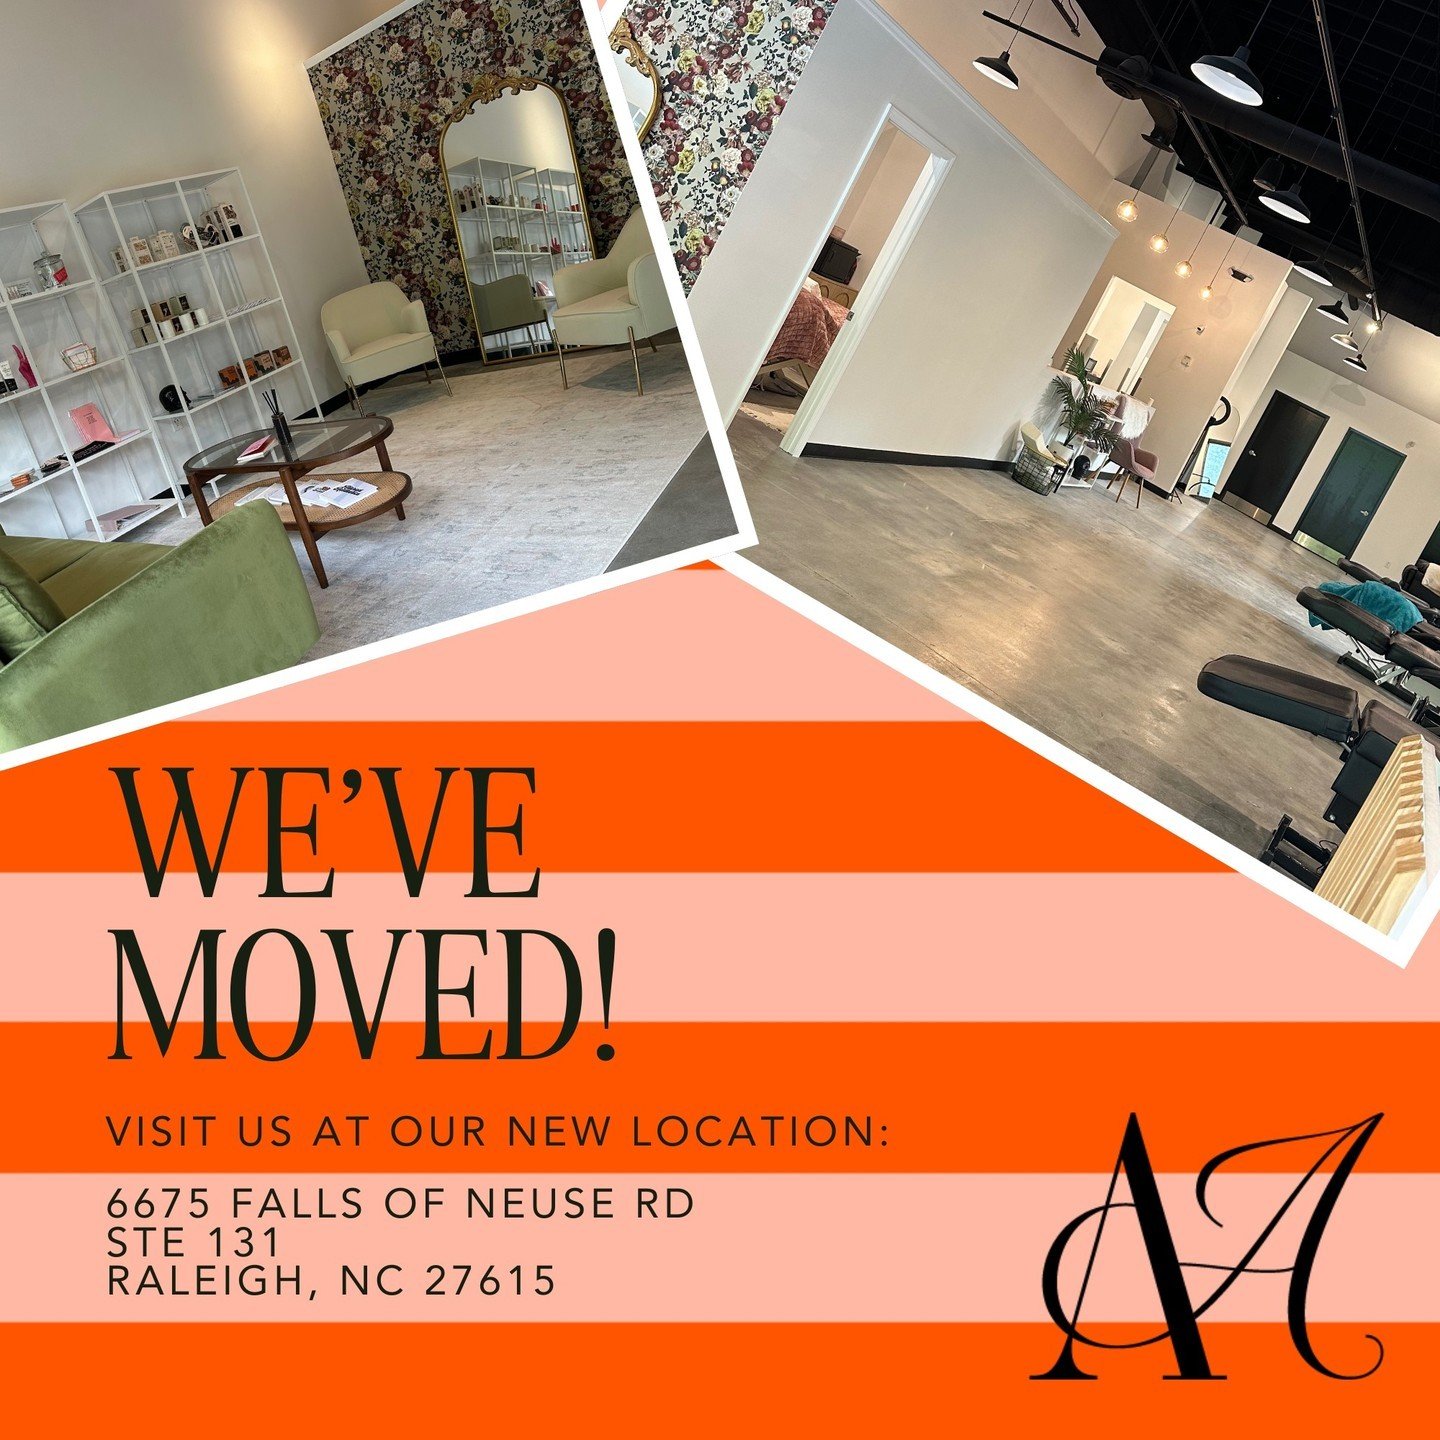 Big News Alert! 🎉 We've moved and the excitement is off the charts! 

Our new studio, just three doors down, is bigger, brighter, and brimming with possibilities! Can't wait to welcome you to our fabulous new space! Oh, and brace yourself for some i